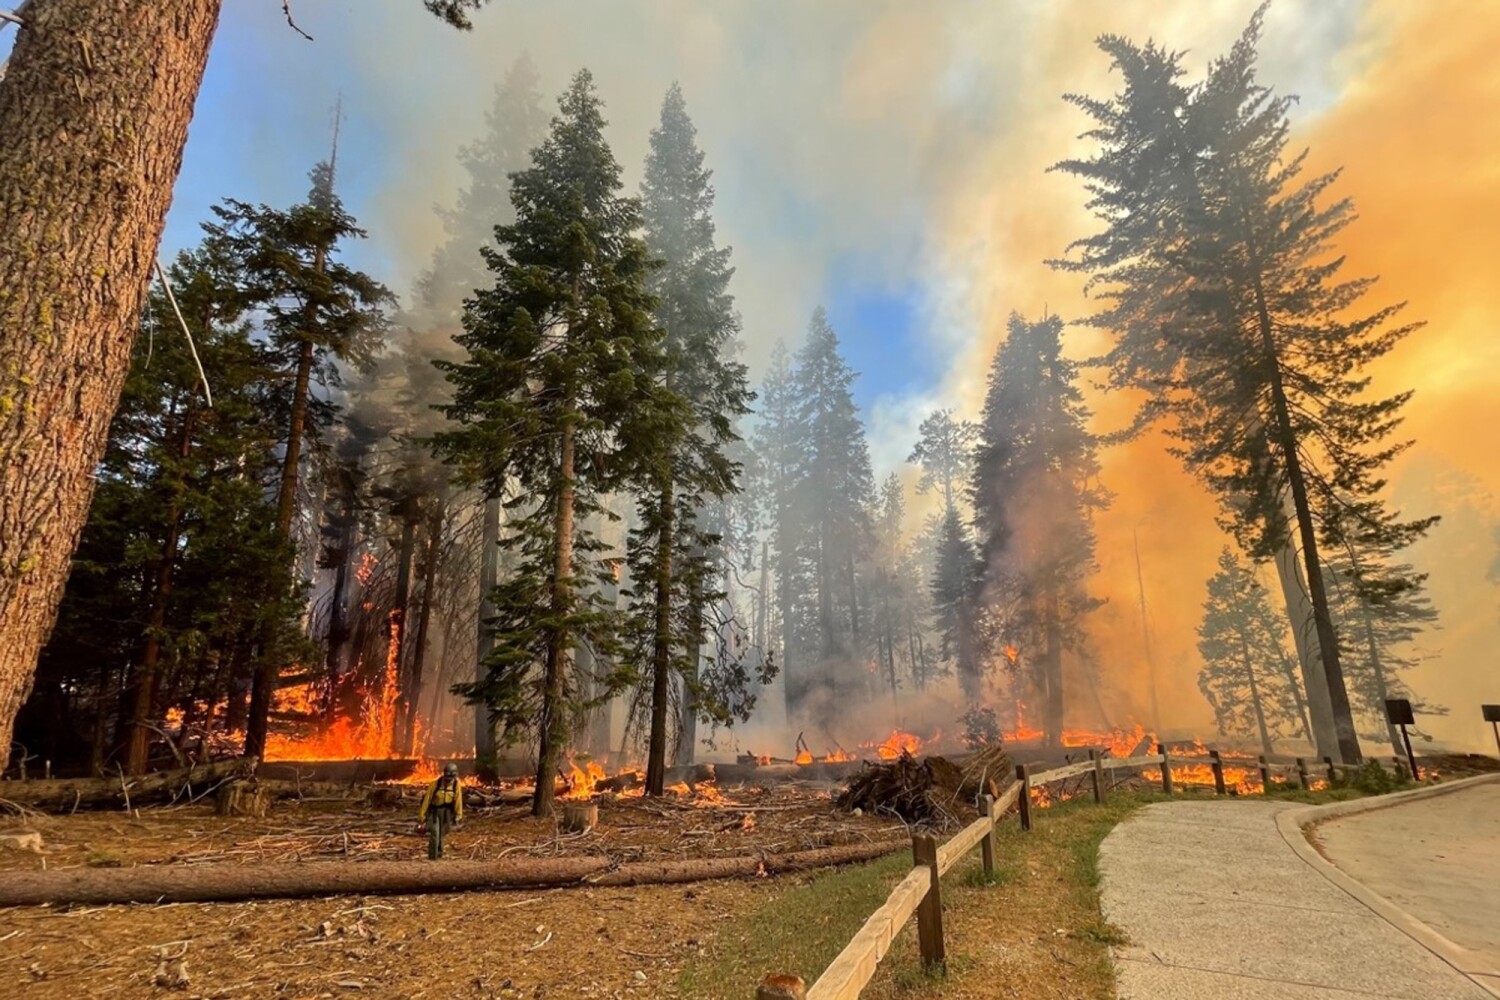 Out-of-control Yosemite fire threatens iconic giant sequoias in Mariposa Grove